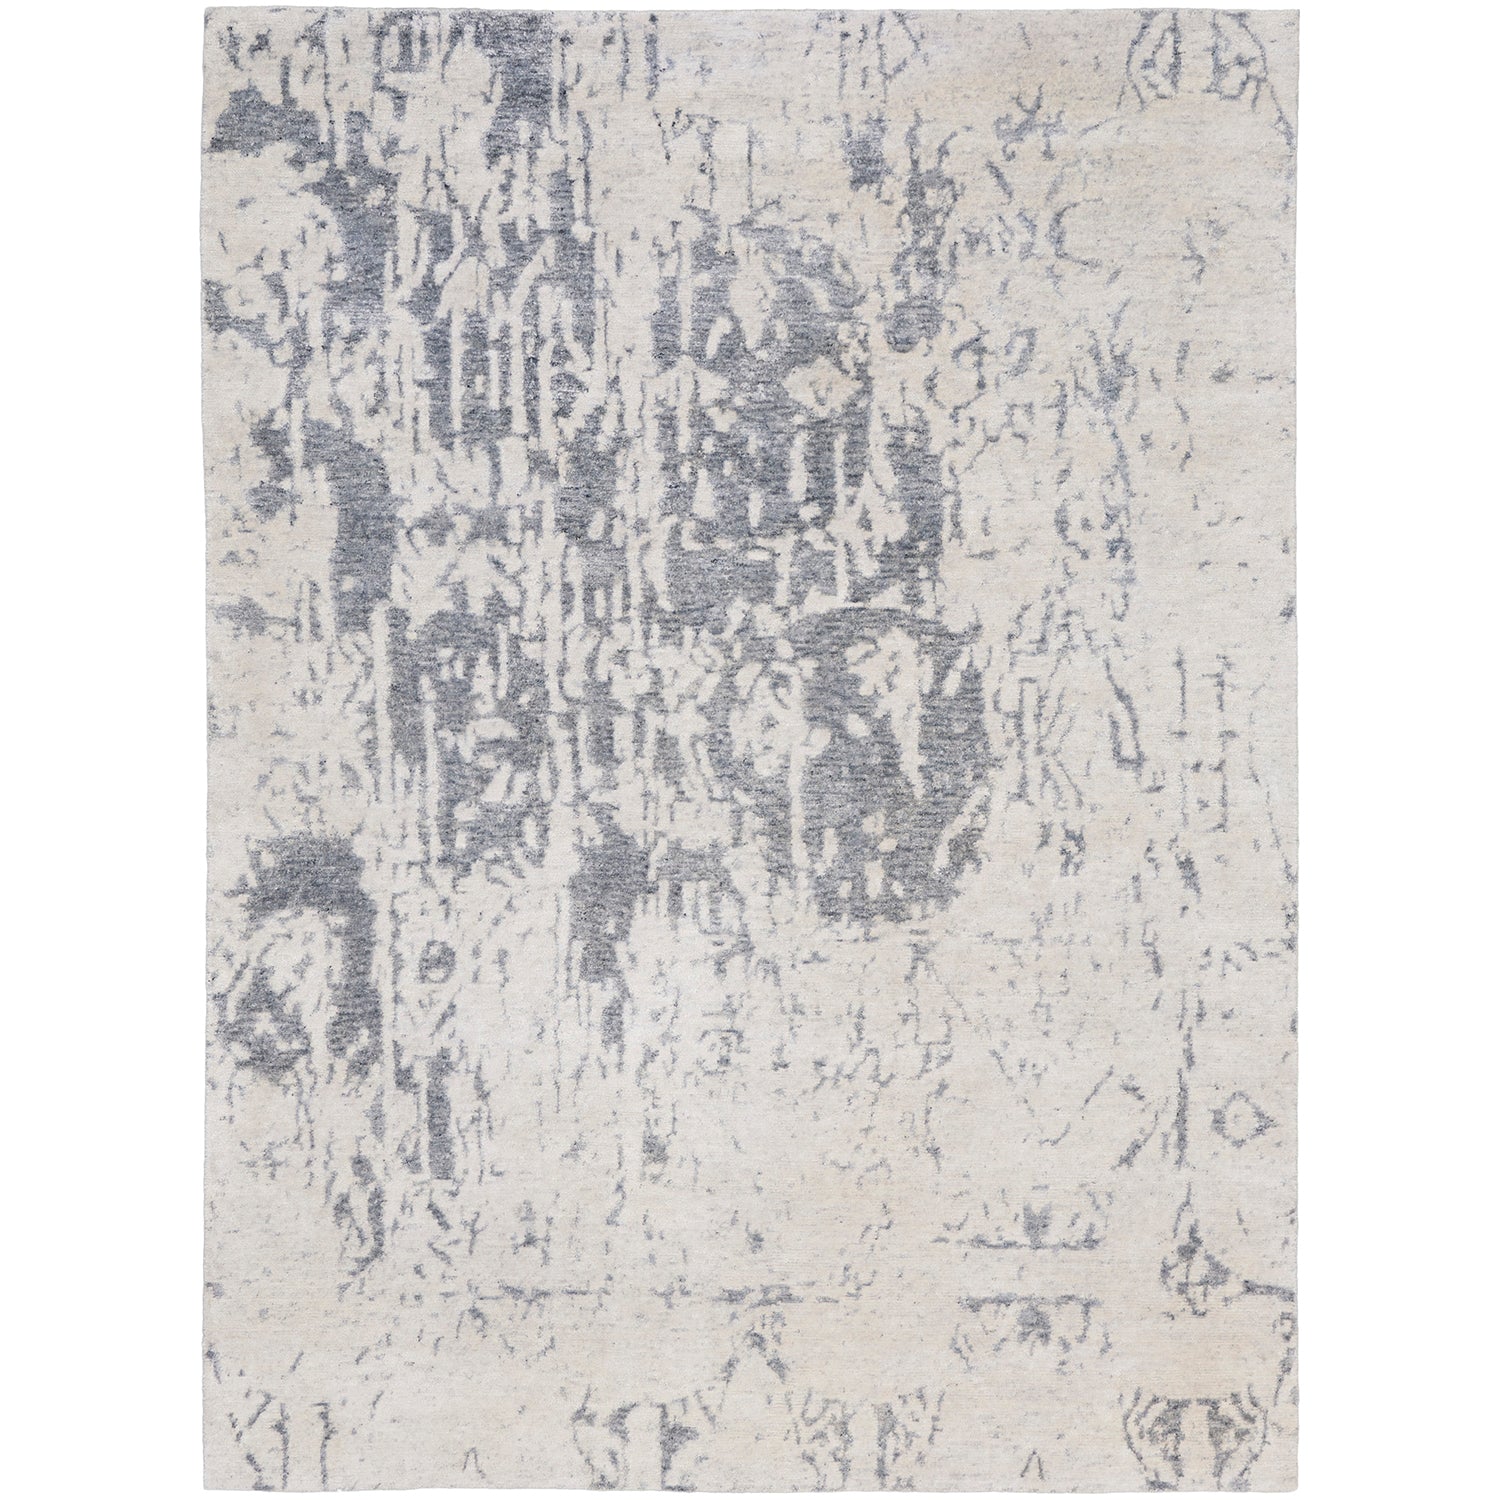 Vintage-inspired gray and off-white abstract rug with artistic design.